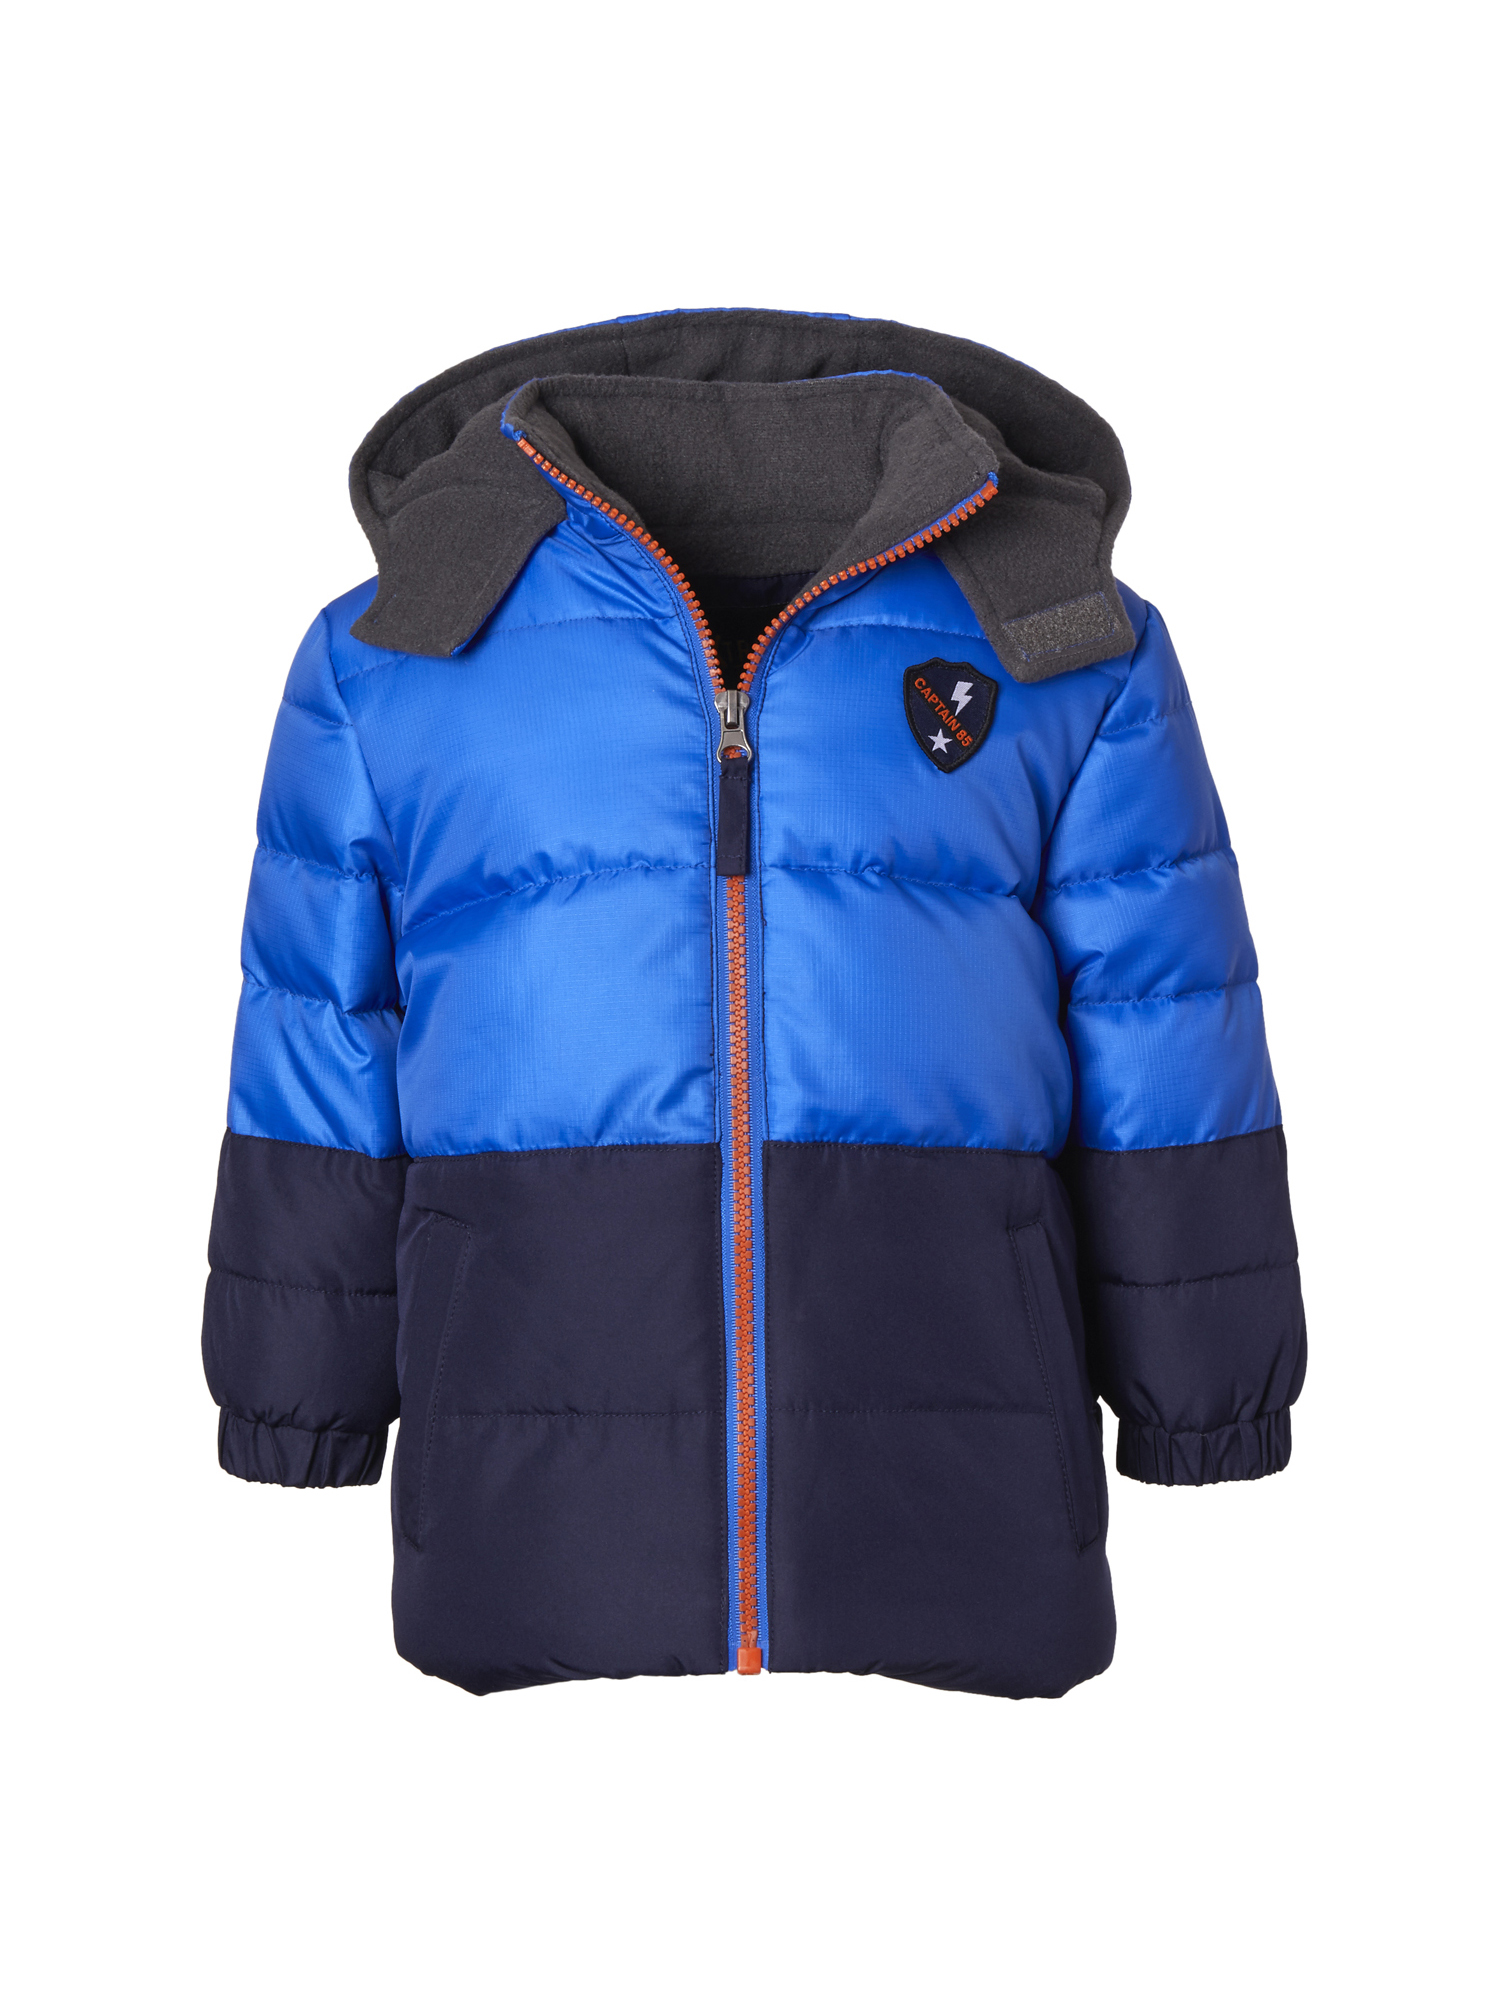 iXtreme Colorblock Puffer Jacket with Front Patch (Little Boys & Big Boys) - image 1 of 2